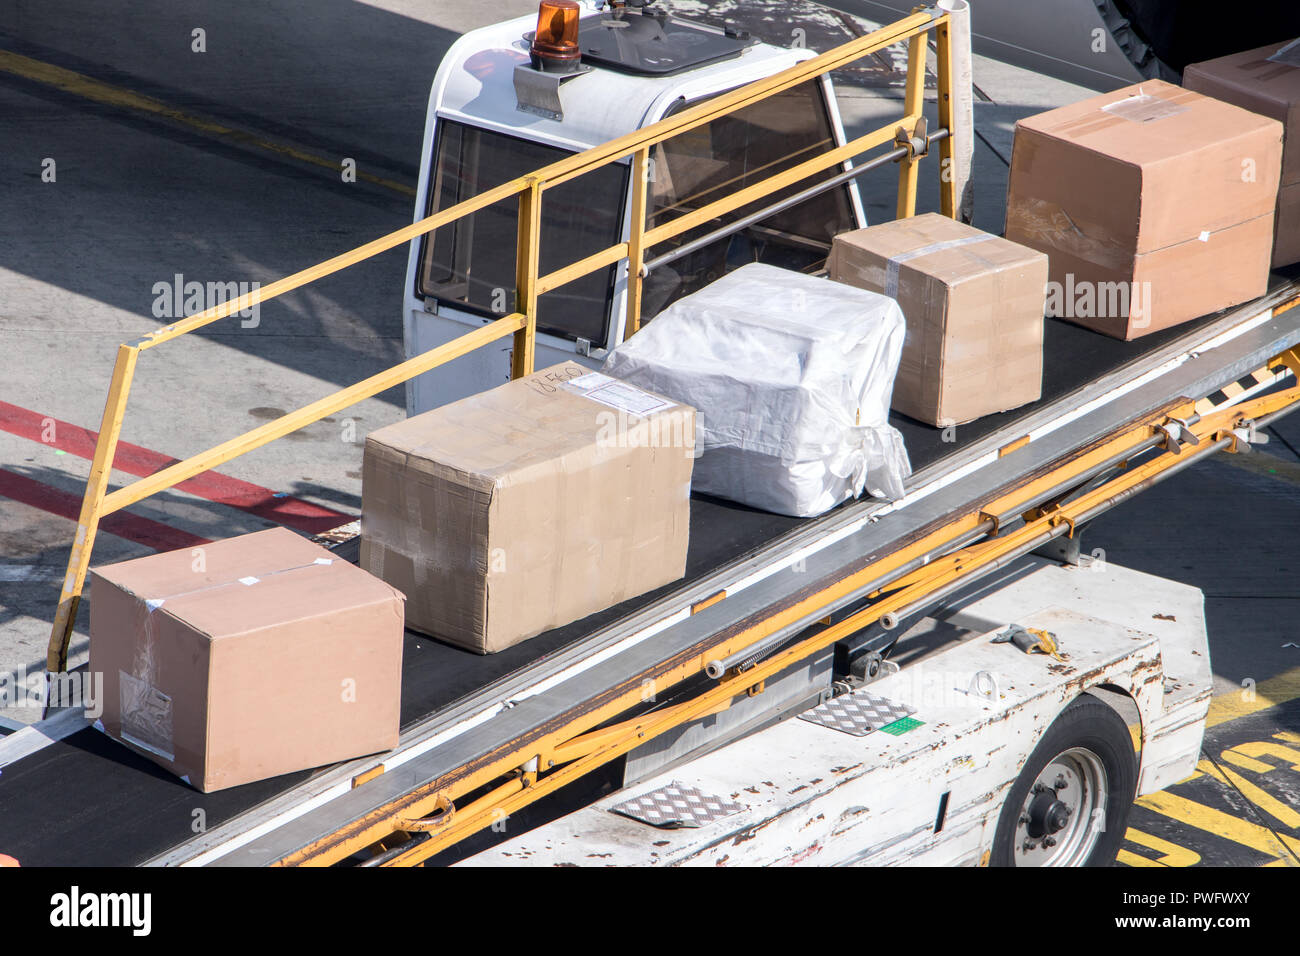 Unloading the packet from the fuselage of aircraft. The packages ride on the conveyor when loading the air plane. Stock Photo